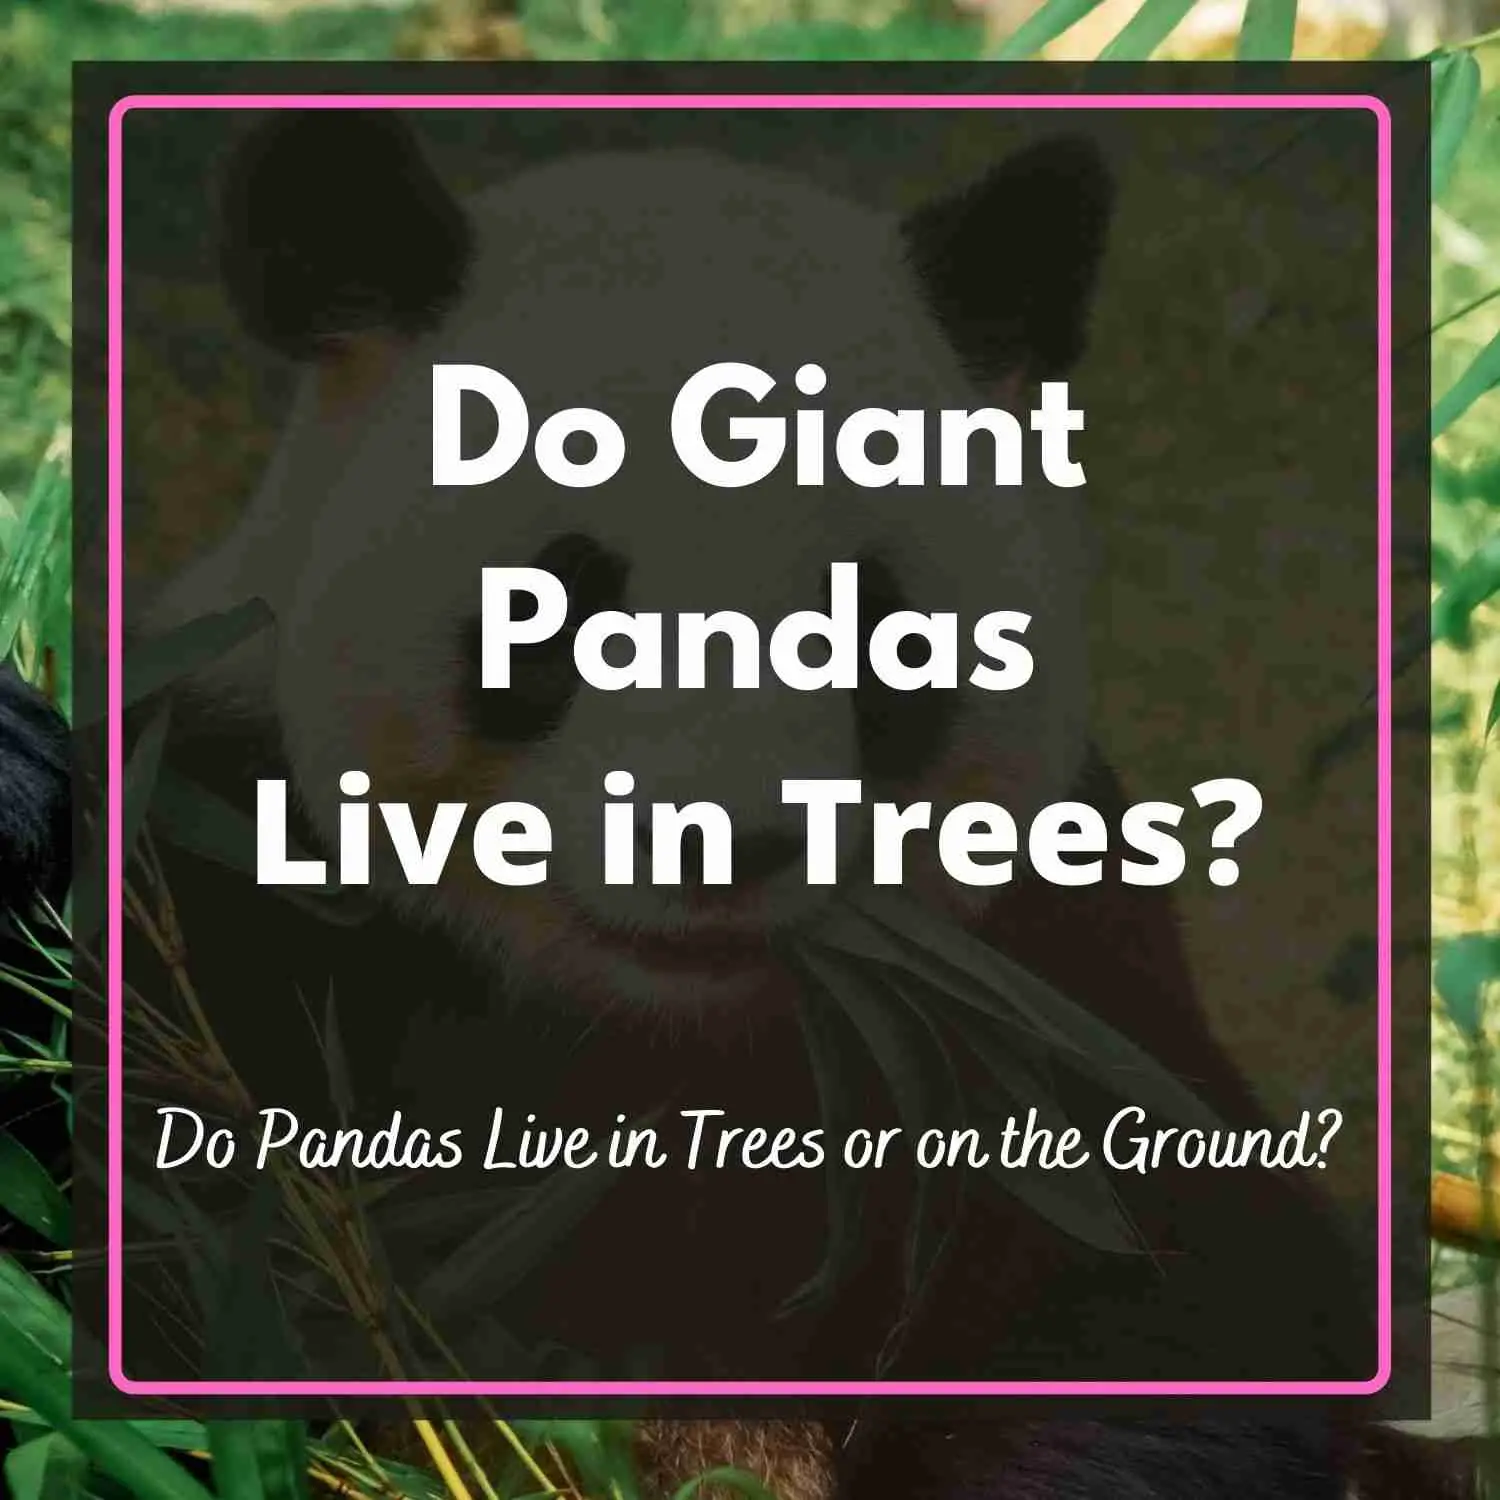 Do giant pandas live in trees or on the ground